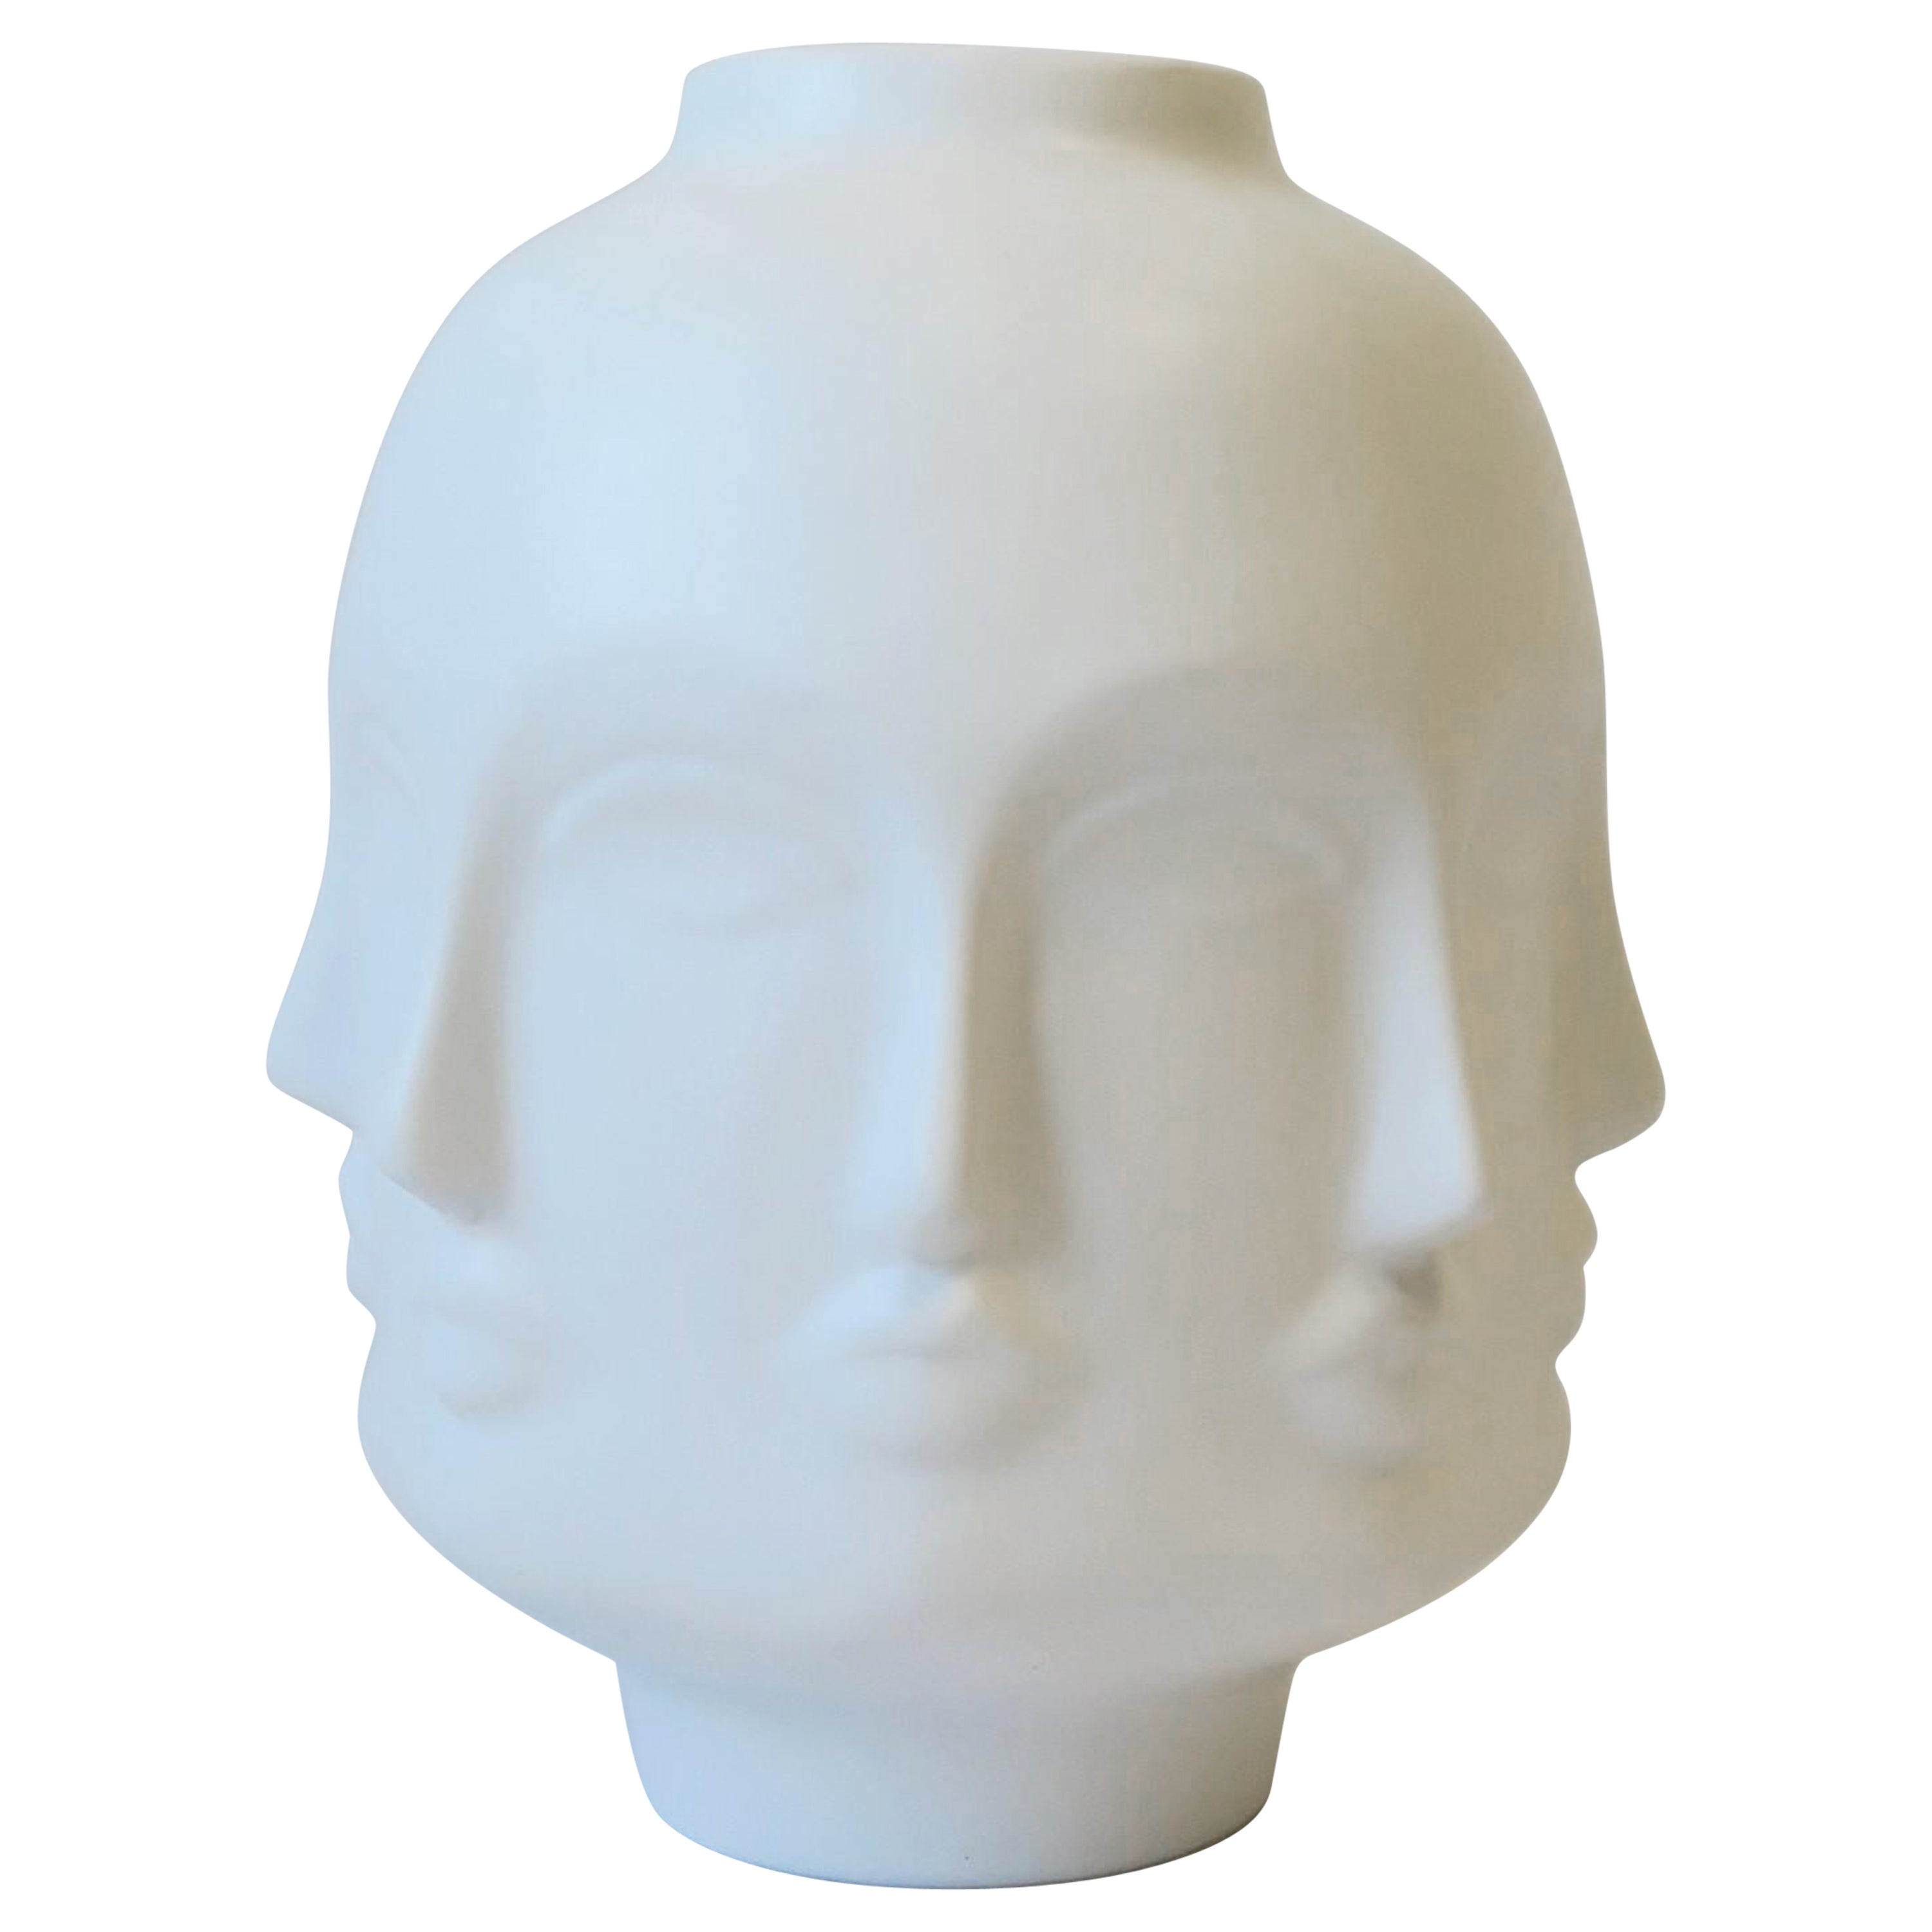 Faces Sculpture Vase in the Fornasetti Style